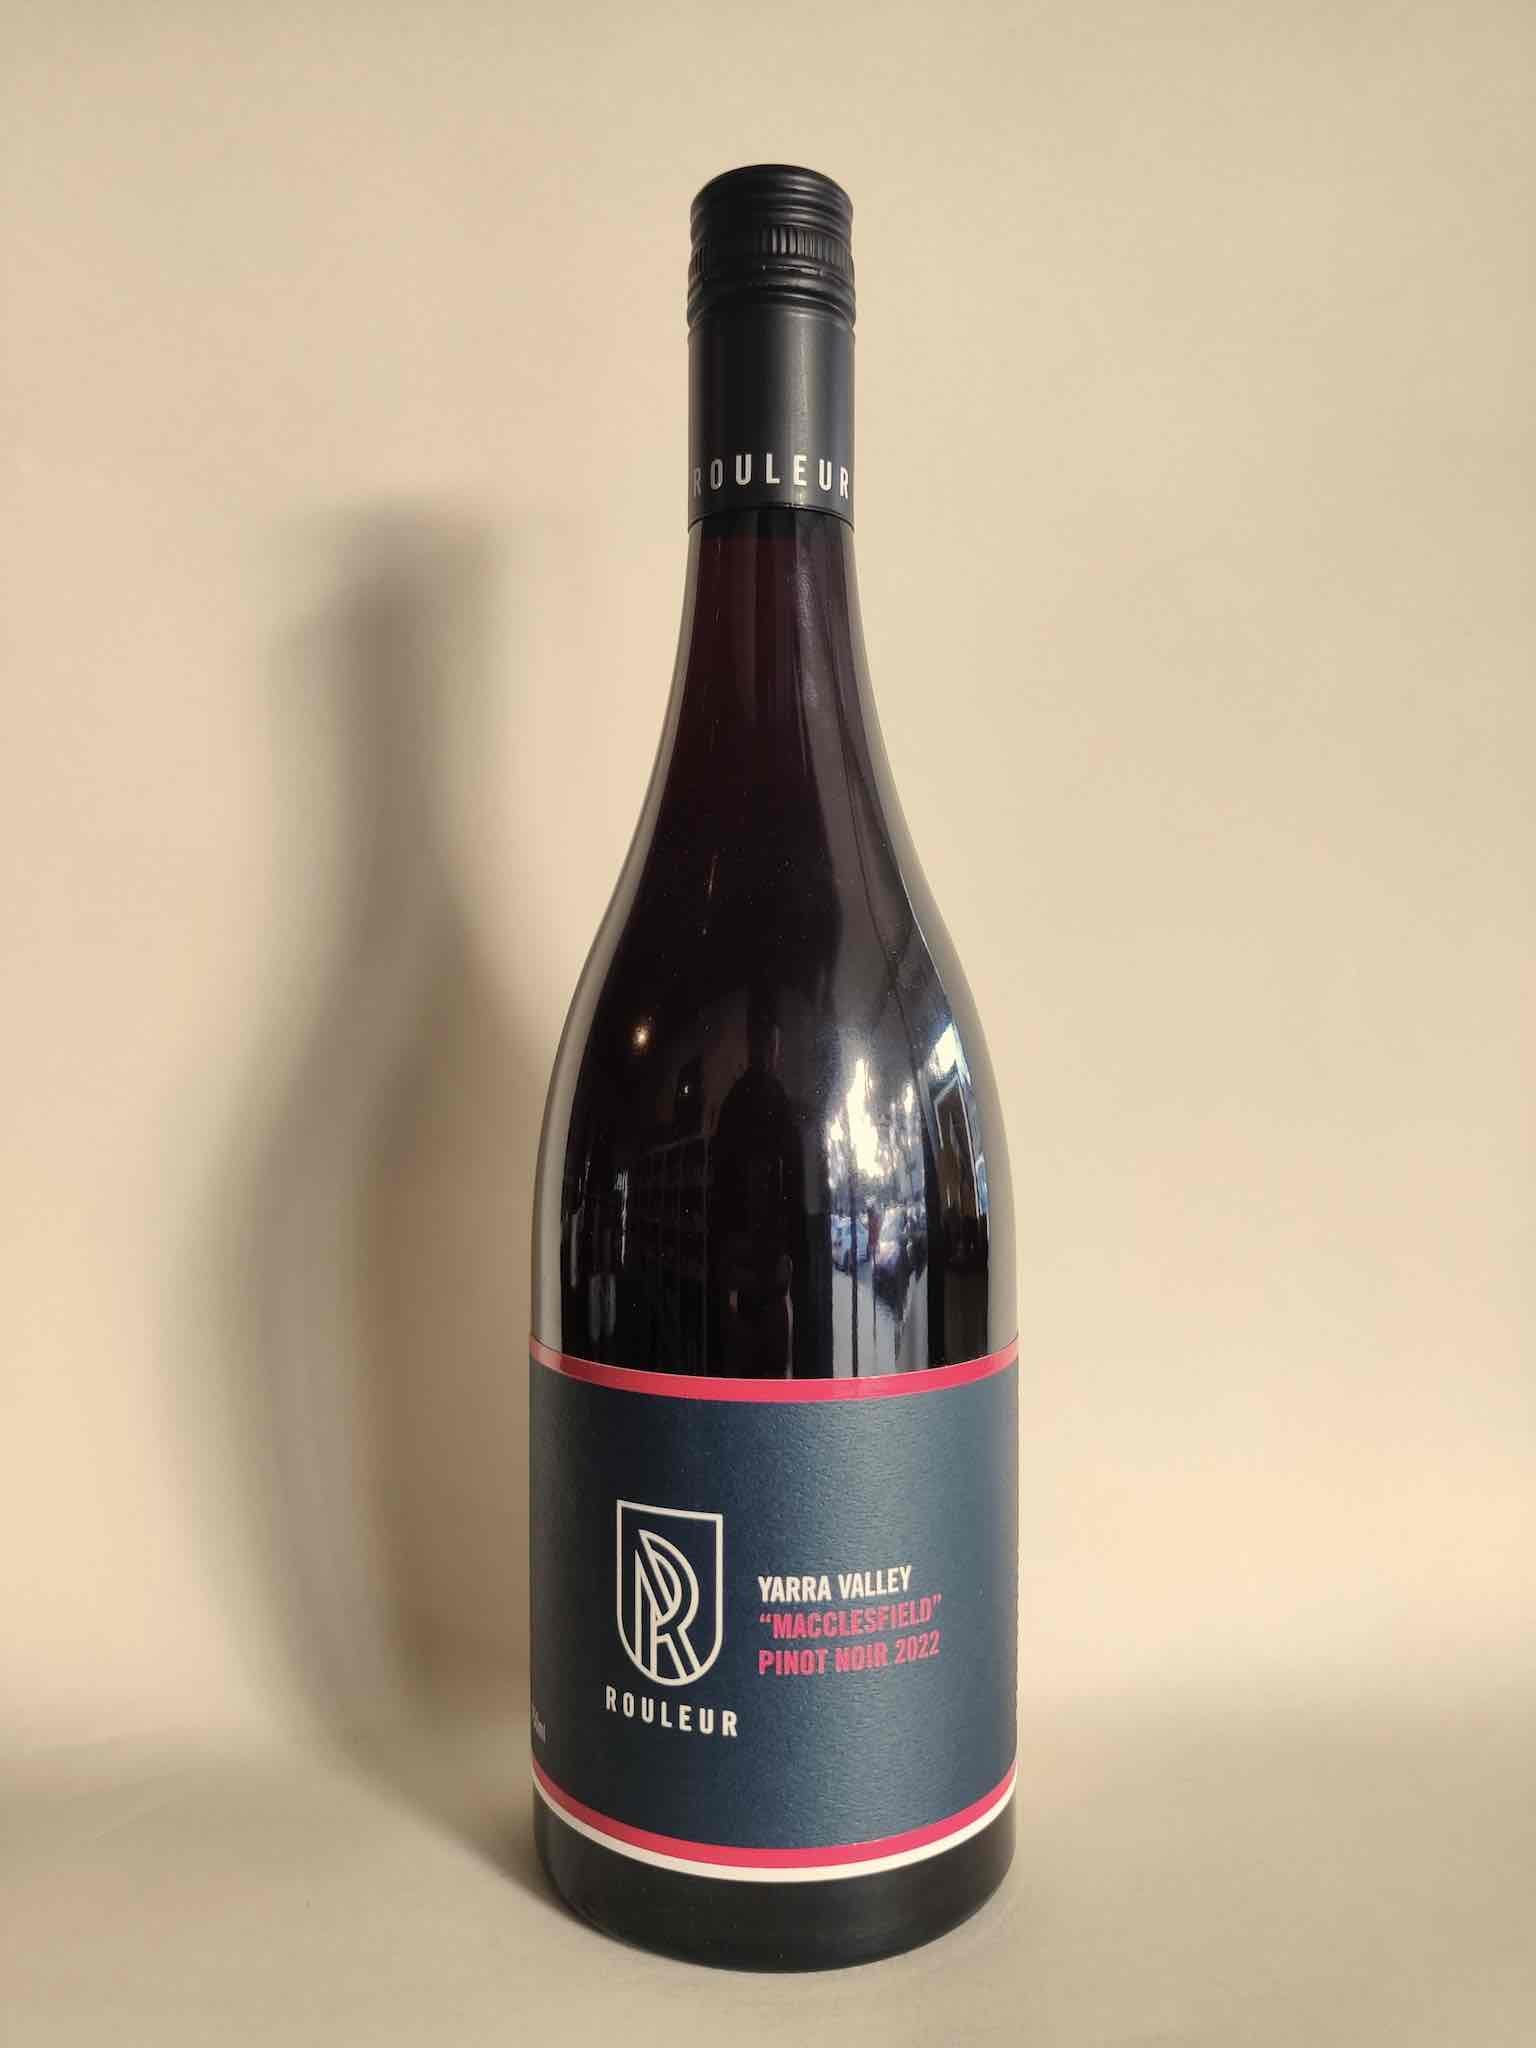 A bottle of Rouleur Wines Macclesfield Pinot Noir from Yarra Valley, Victoria.